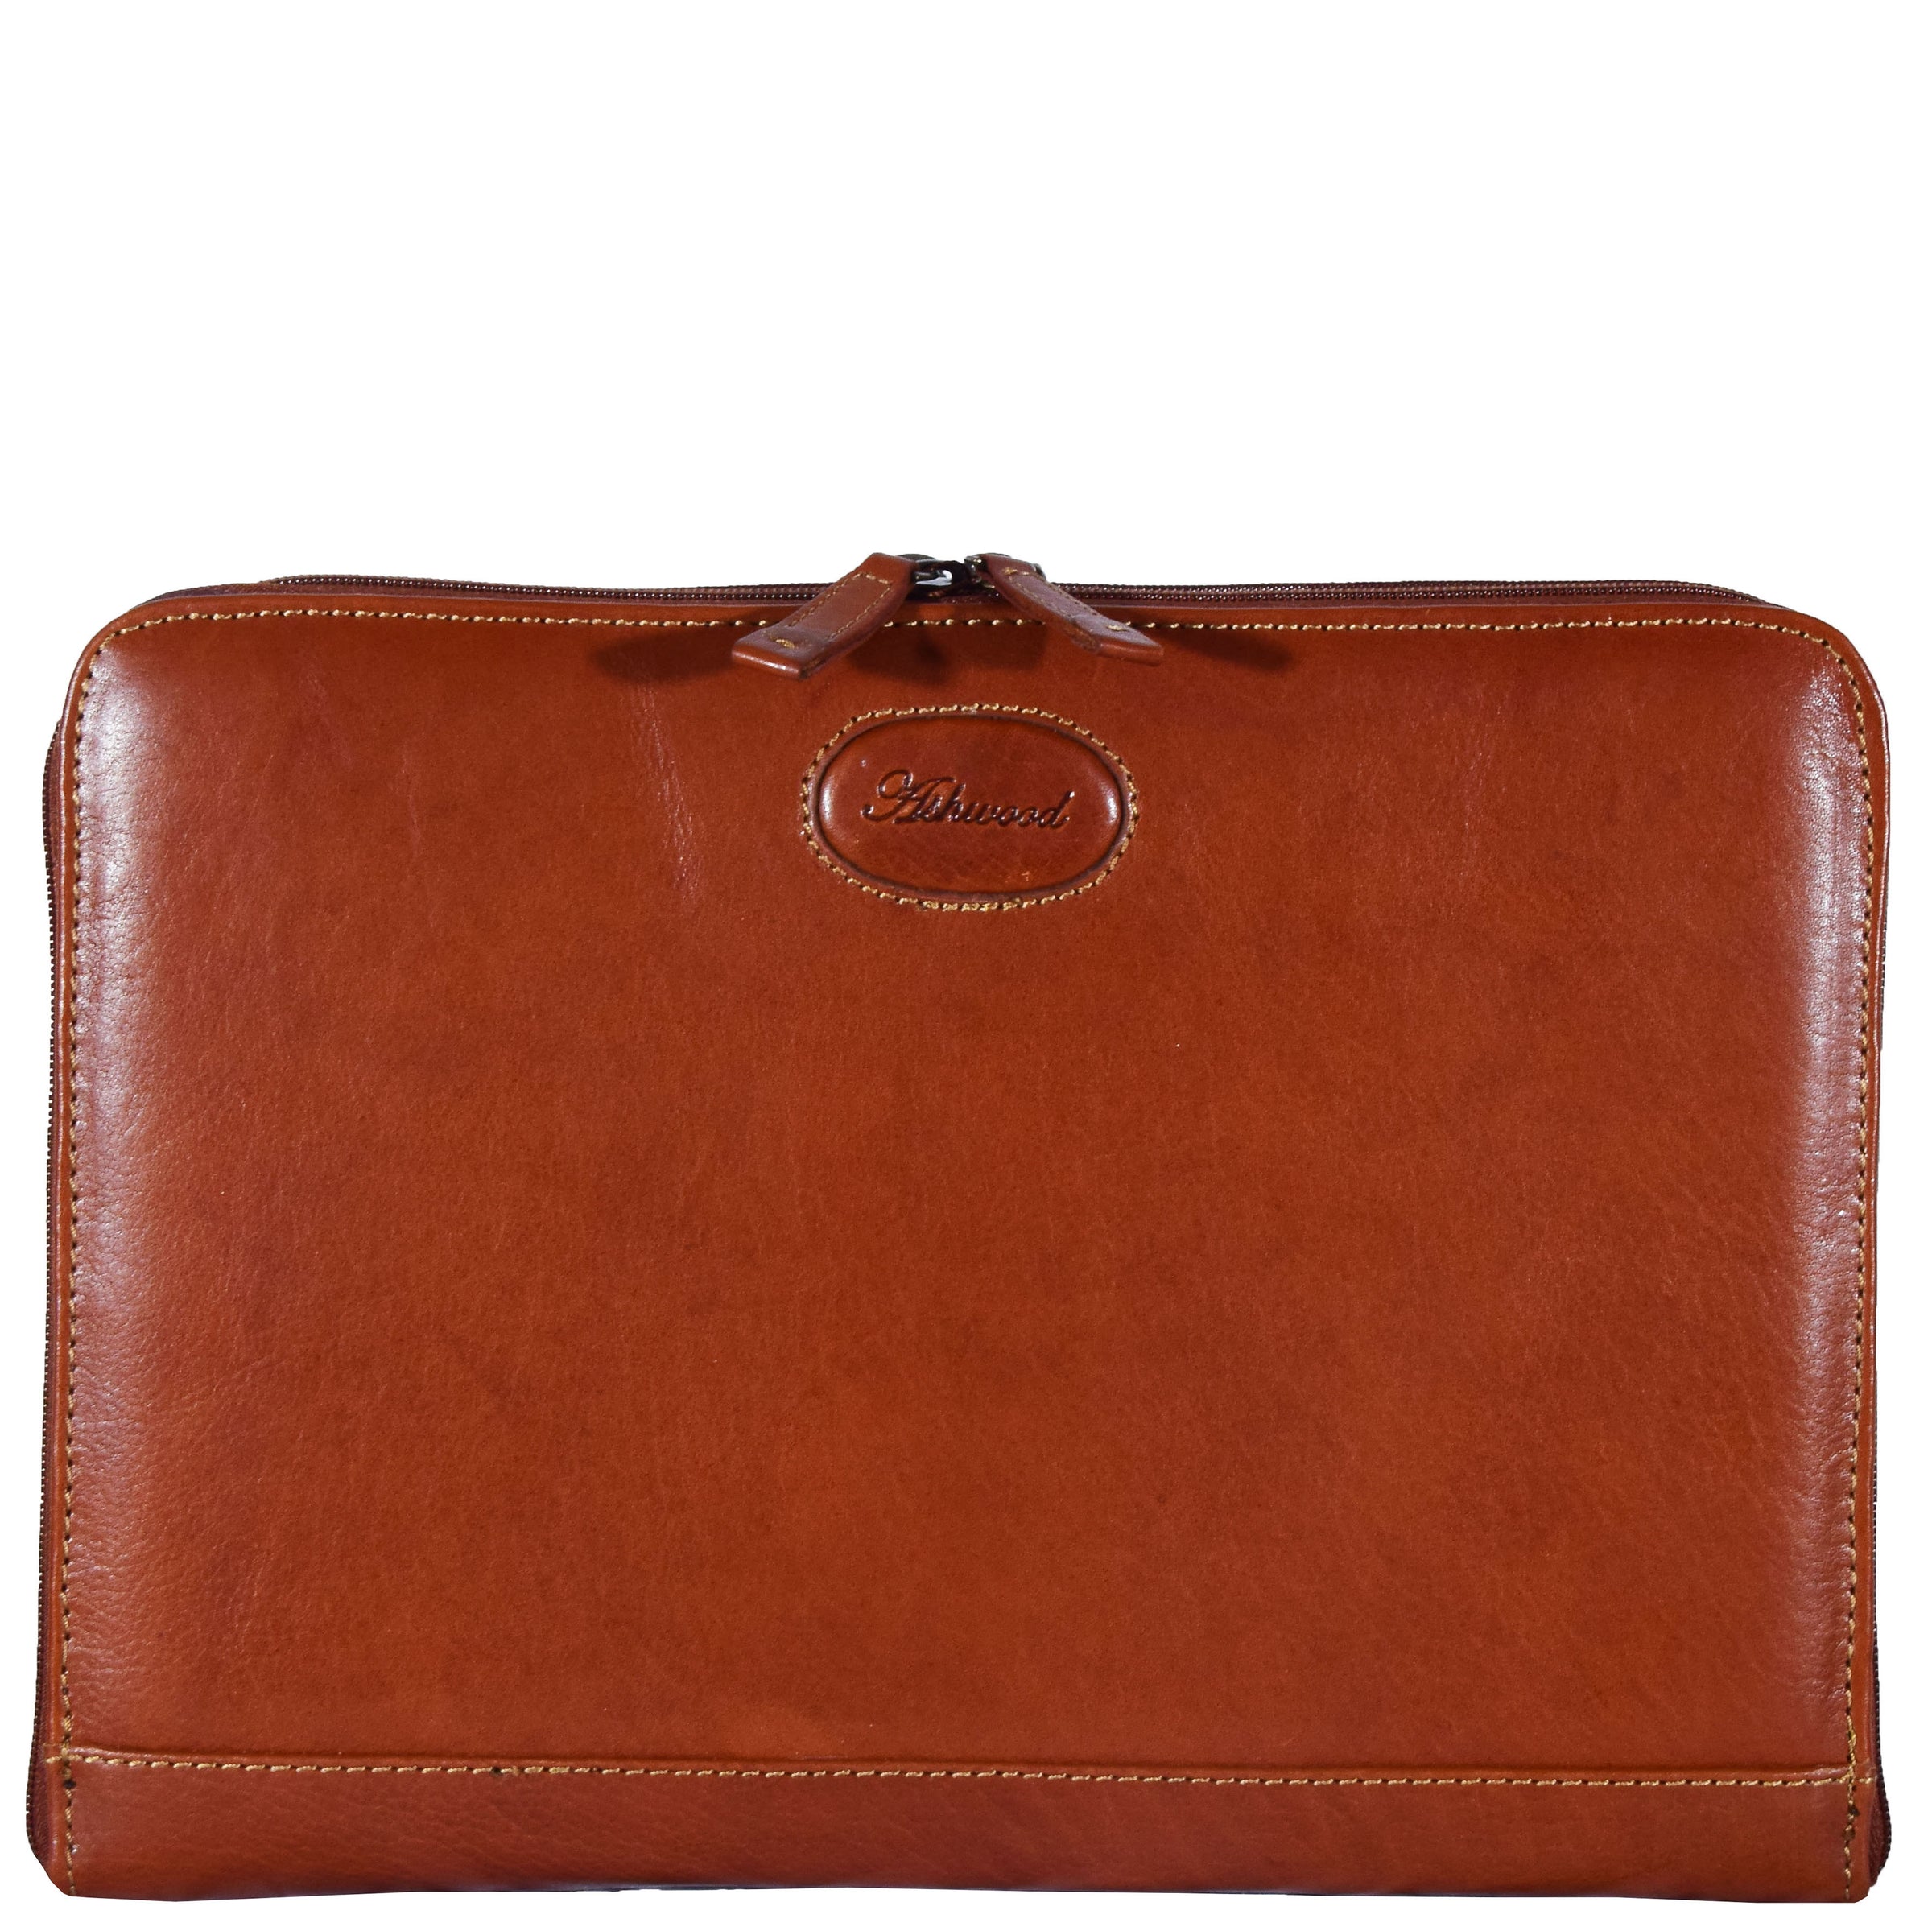 Real Leather Portfolio Case A4 Document Holder | House of Leather